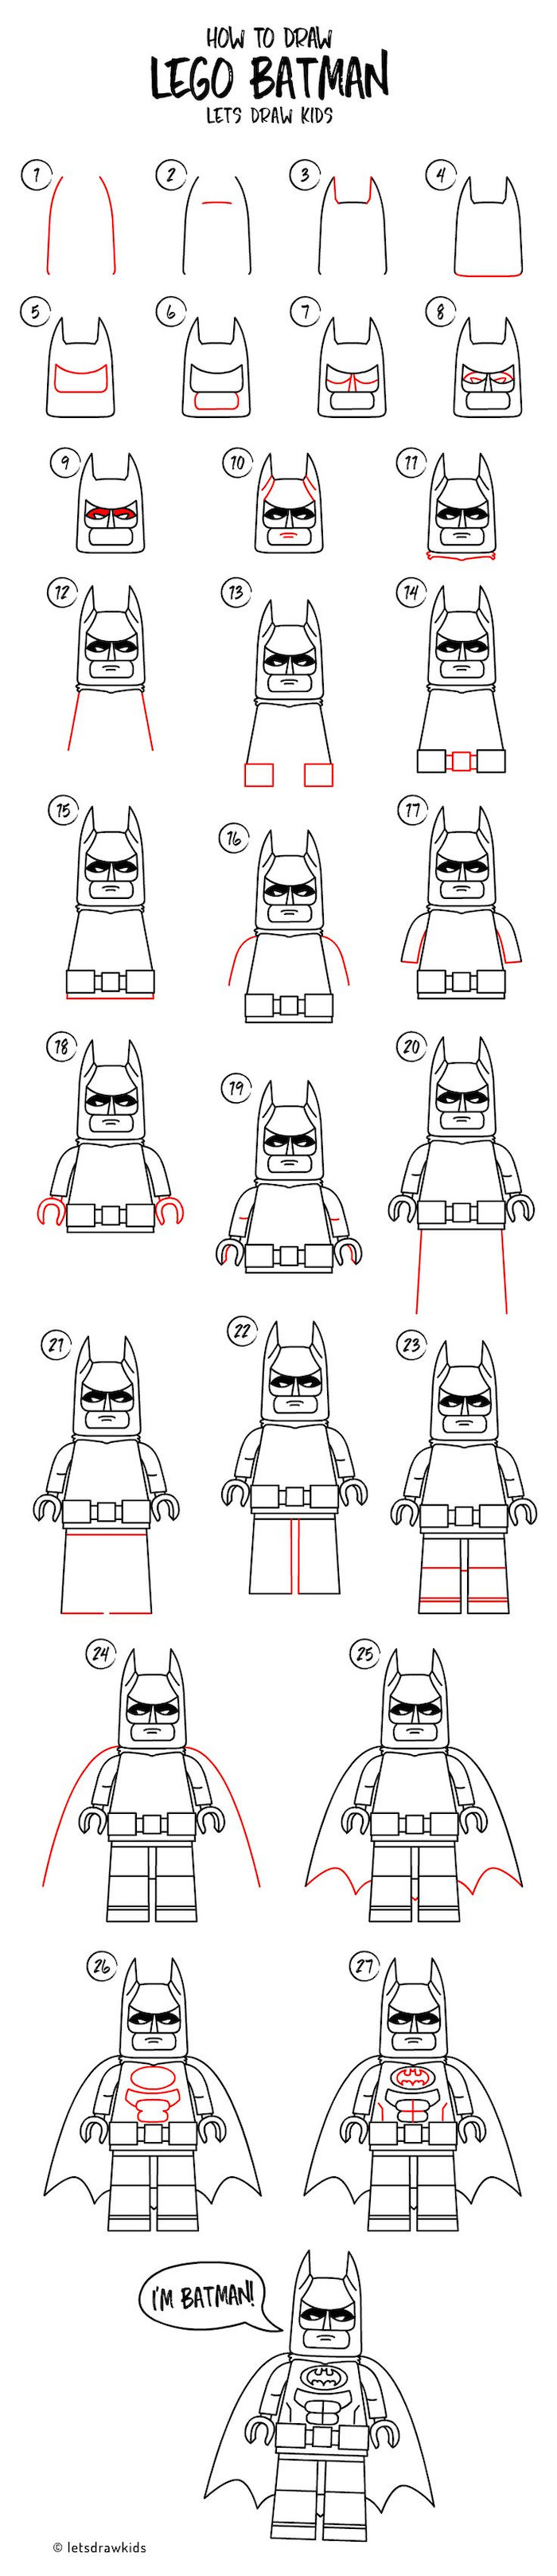 easy drawing tutorials, how to draw lego batman in twenty seven steps, step by step diy tutorial, black and white sketch